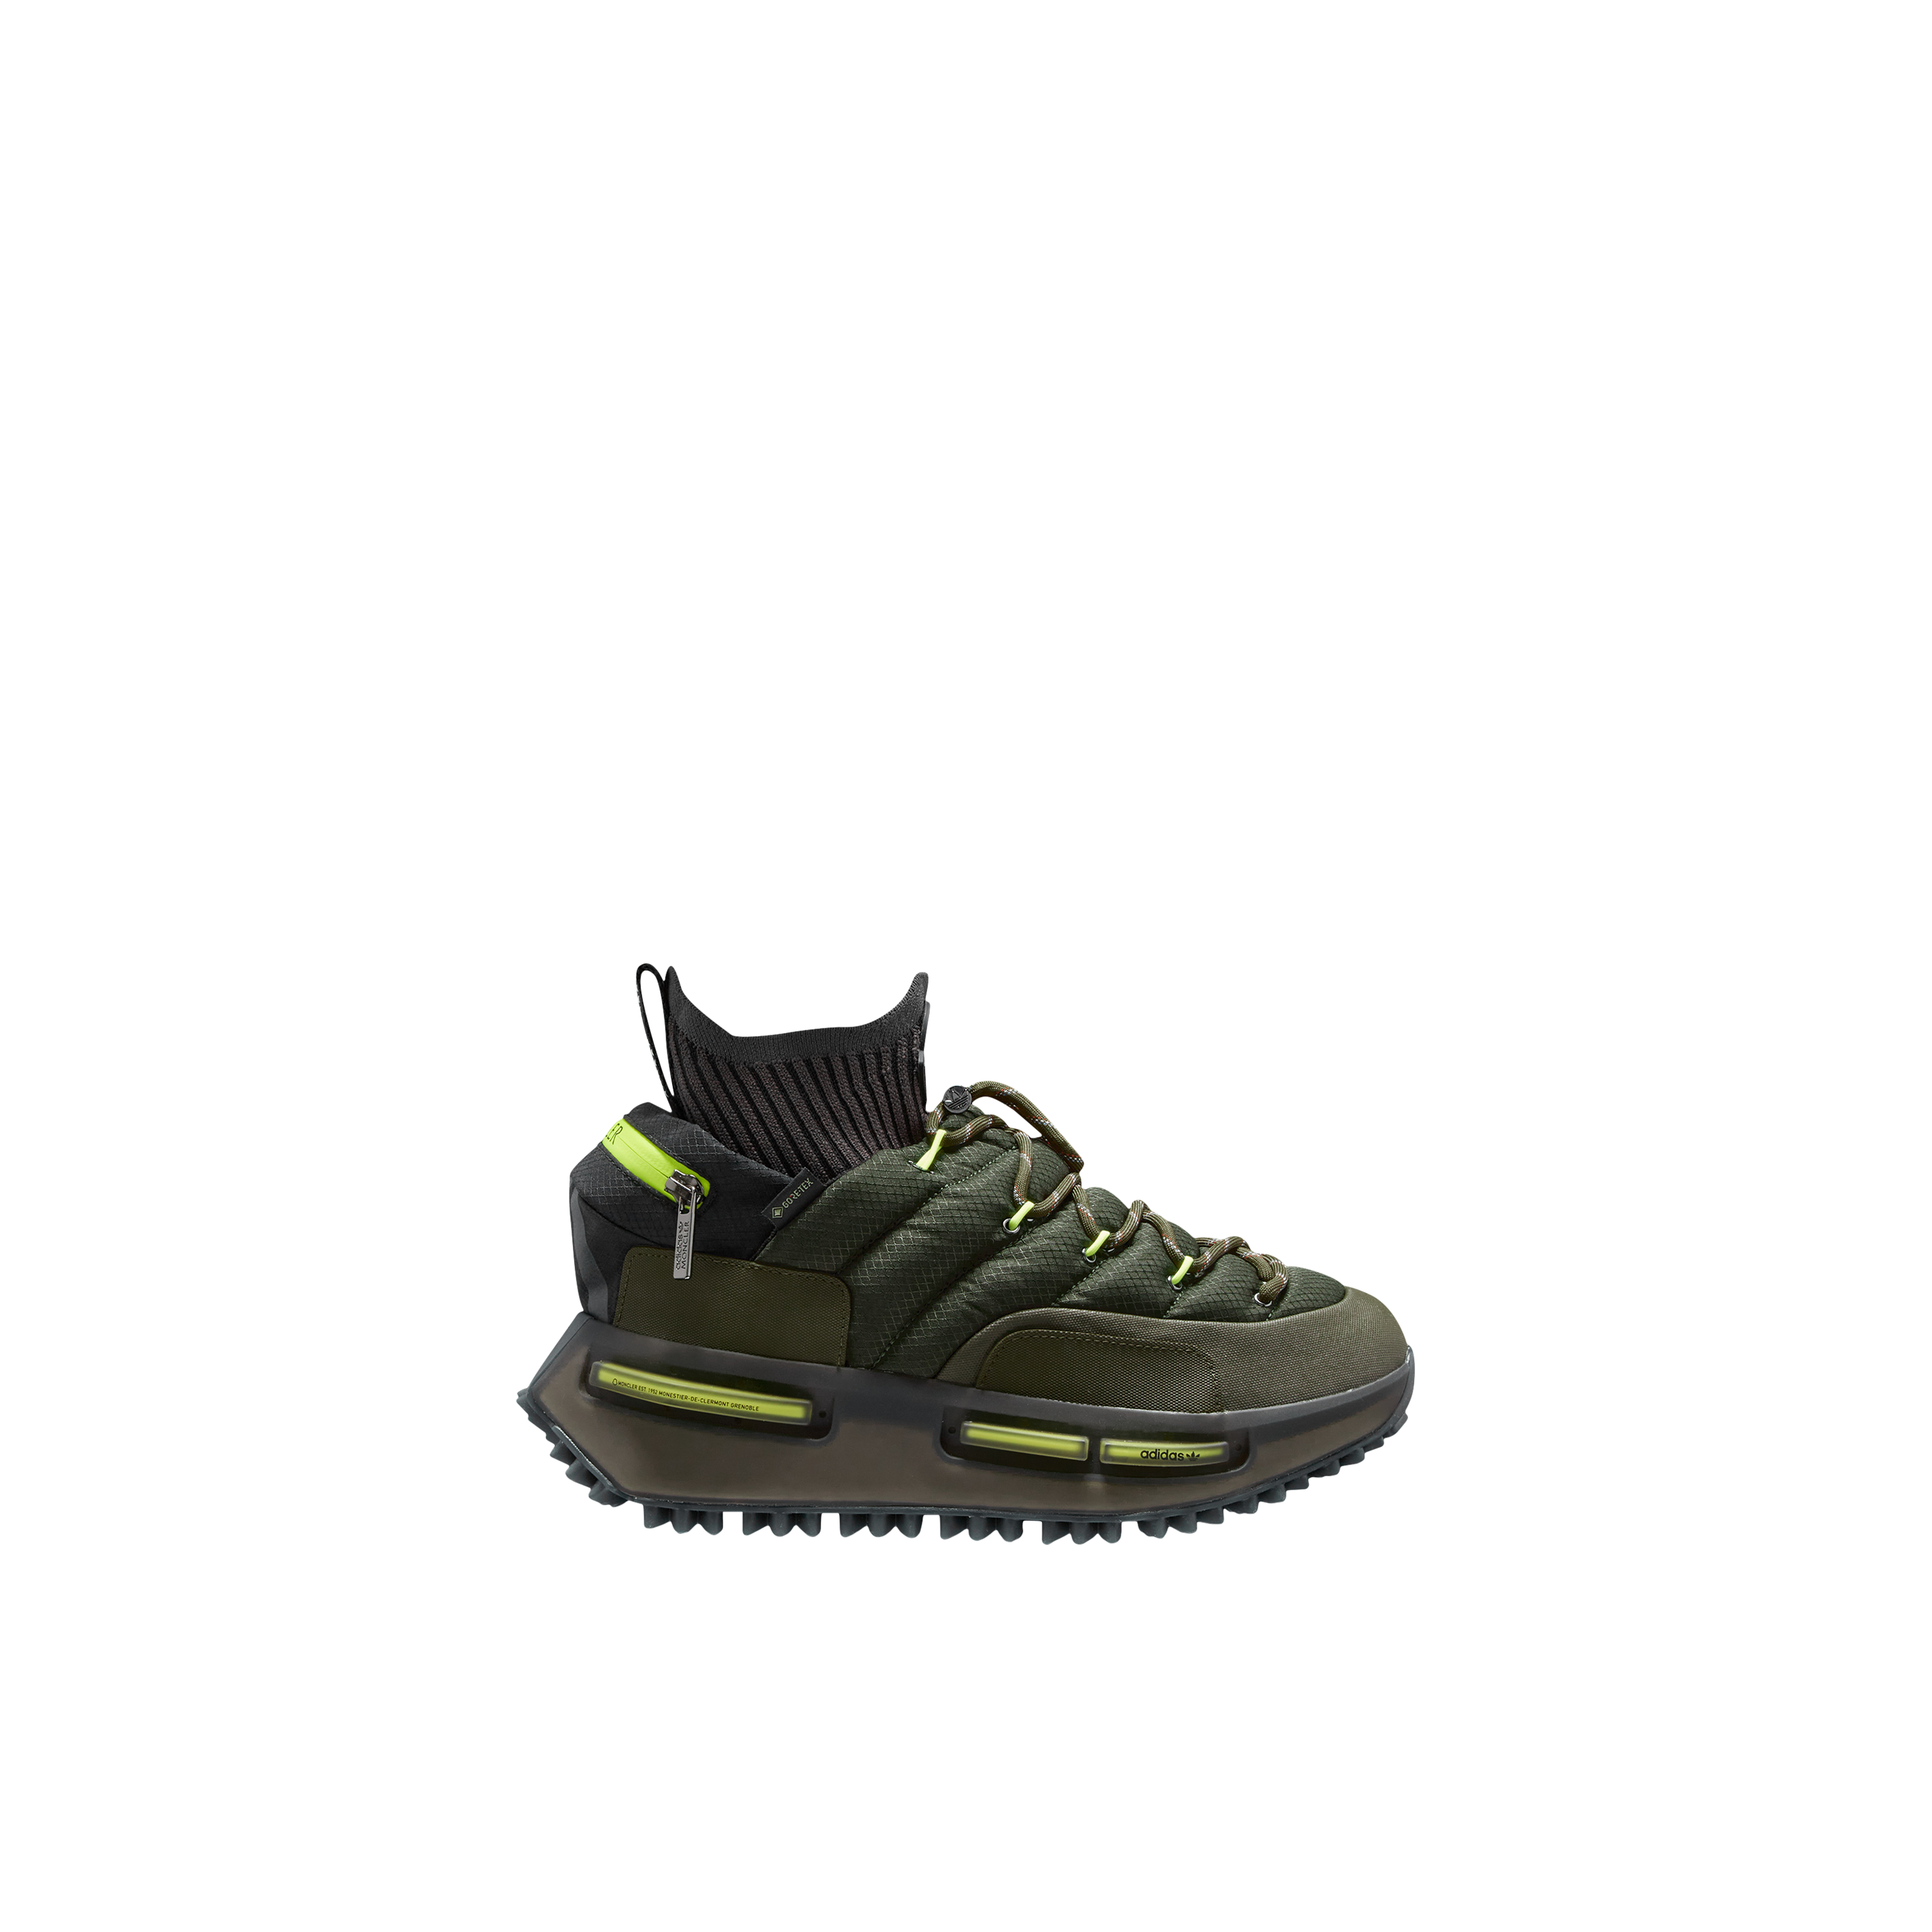 Moncler Nmd Runner Trainers Green